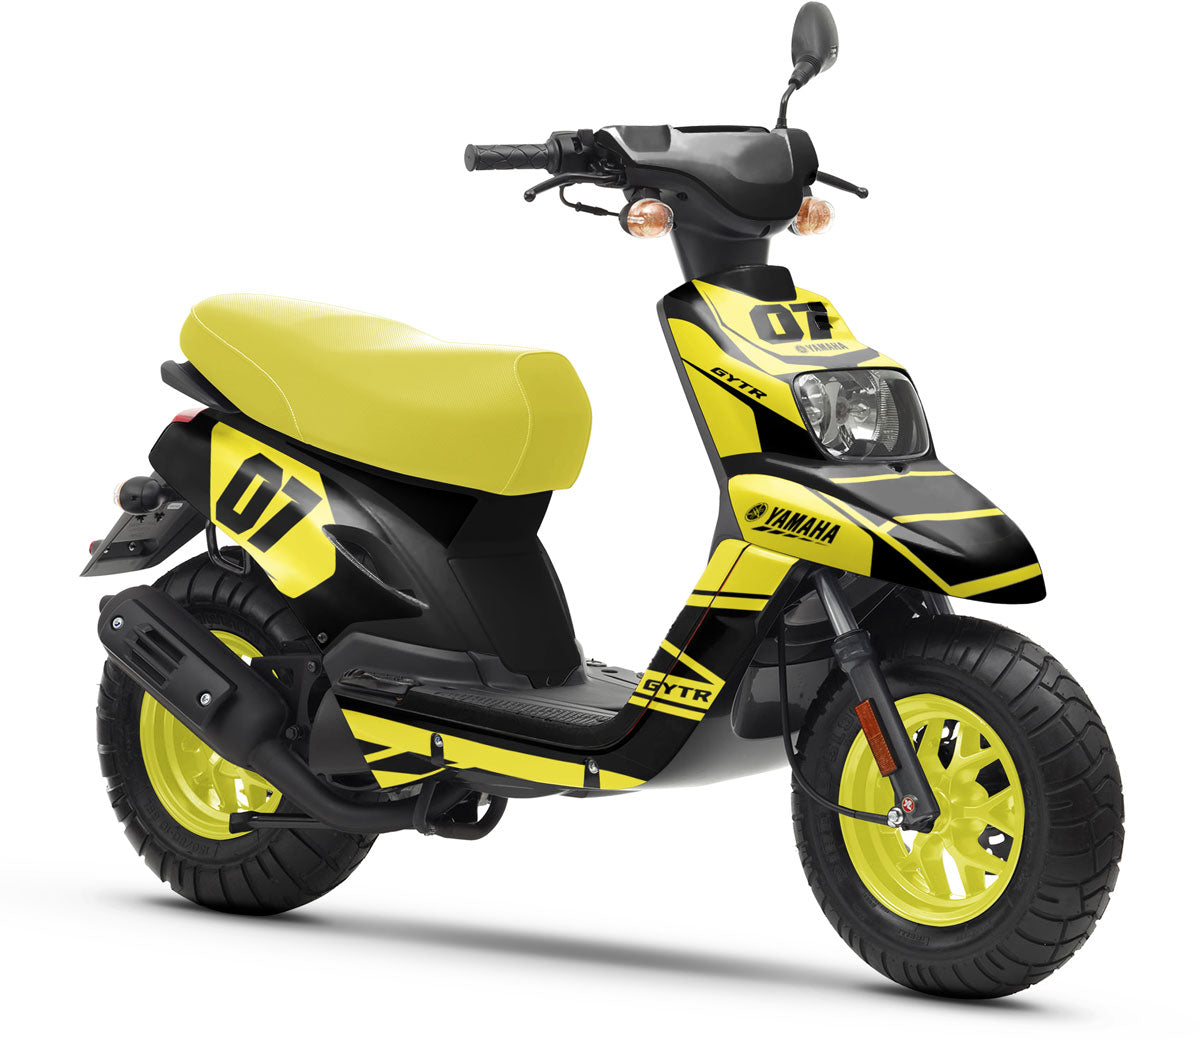 mbk booster spirit / yamaha bw's : r/scooters